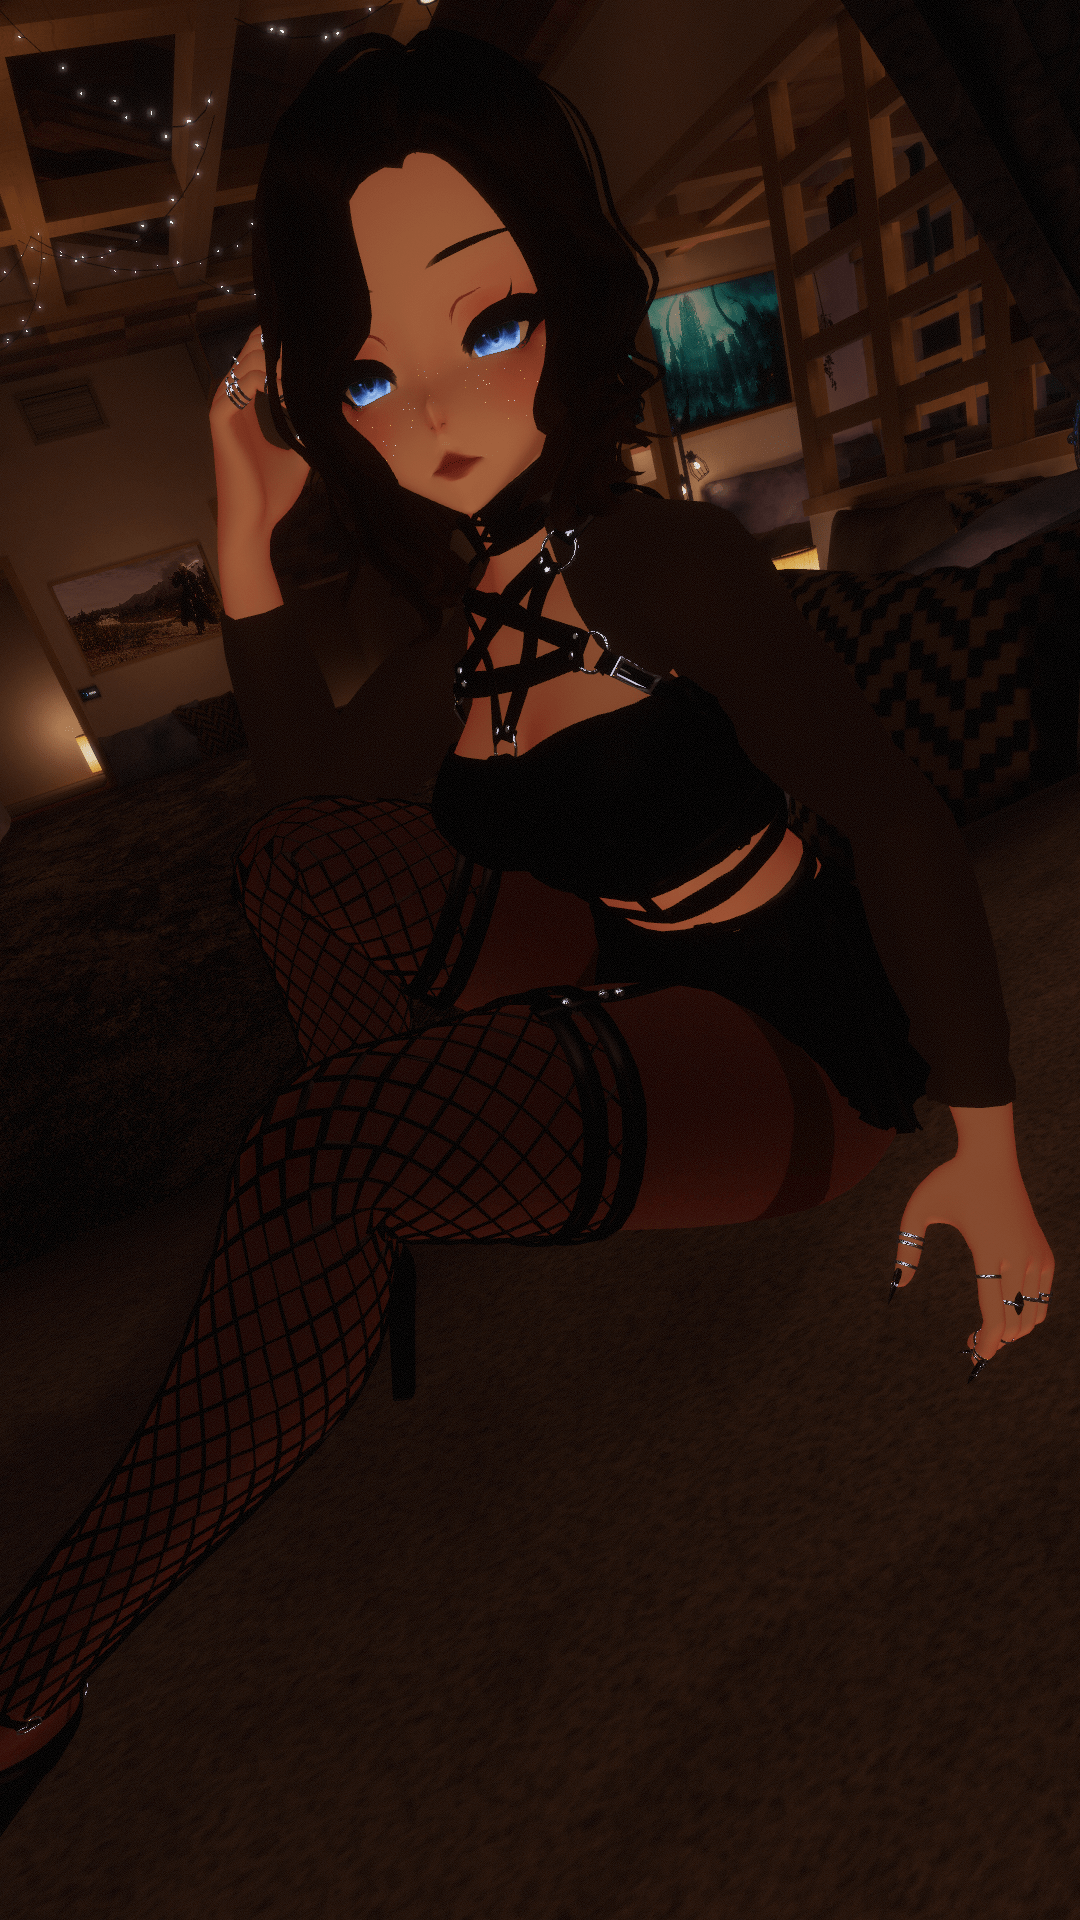 Watch the Photo by ERPGod with the username @ERPGod, who is a star user, posted on January 14, 2022. The post is about the topic Your Virtual Girlfriend. and the text says 'It's a cold, rainy night.💦
Come get close to me. Let me warm you up.🔥'